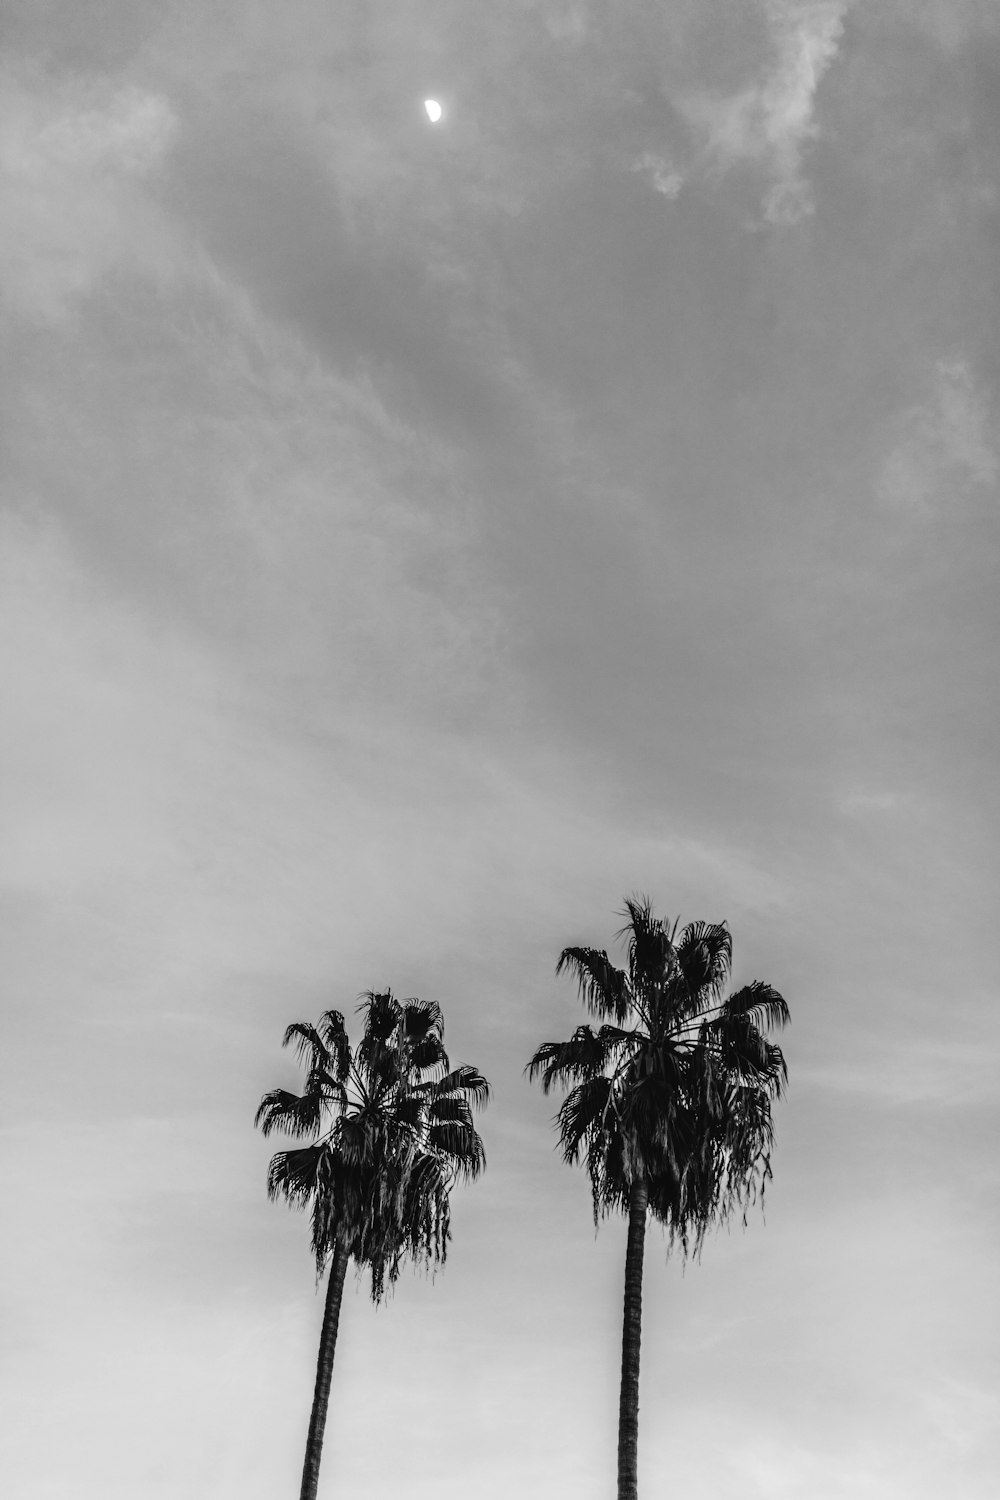 grayscale photography of two coconut trees under cloudy sky